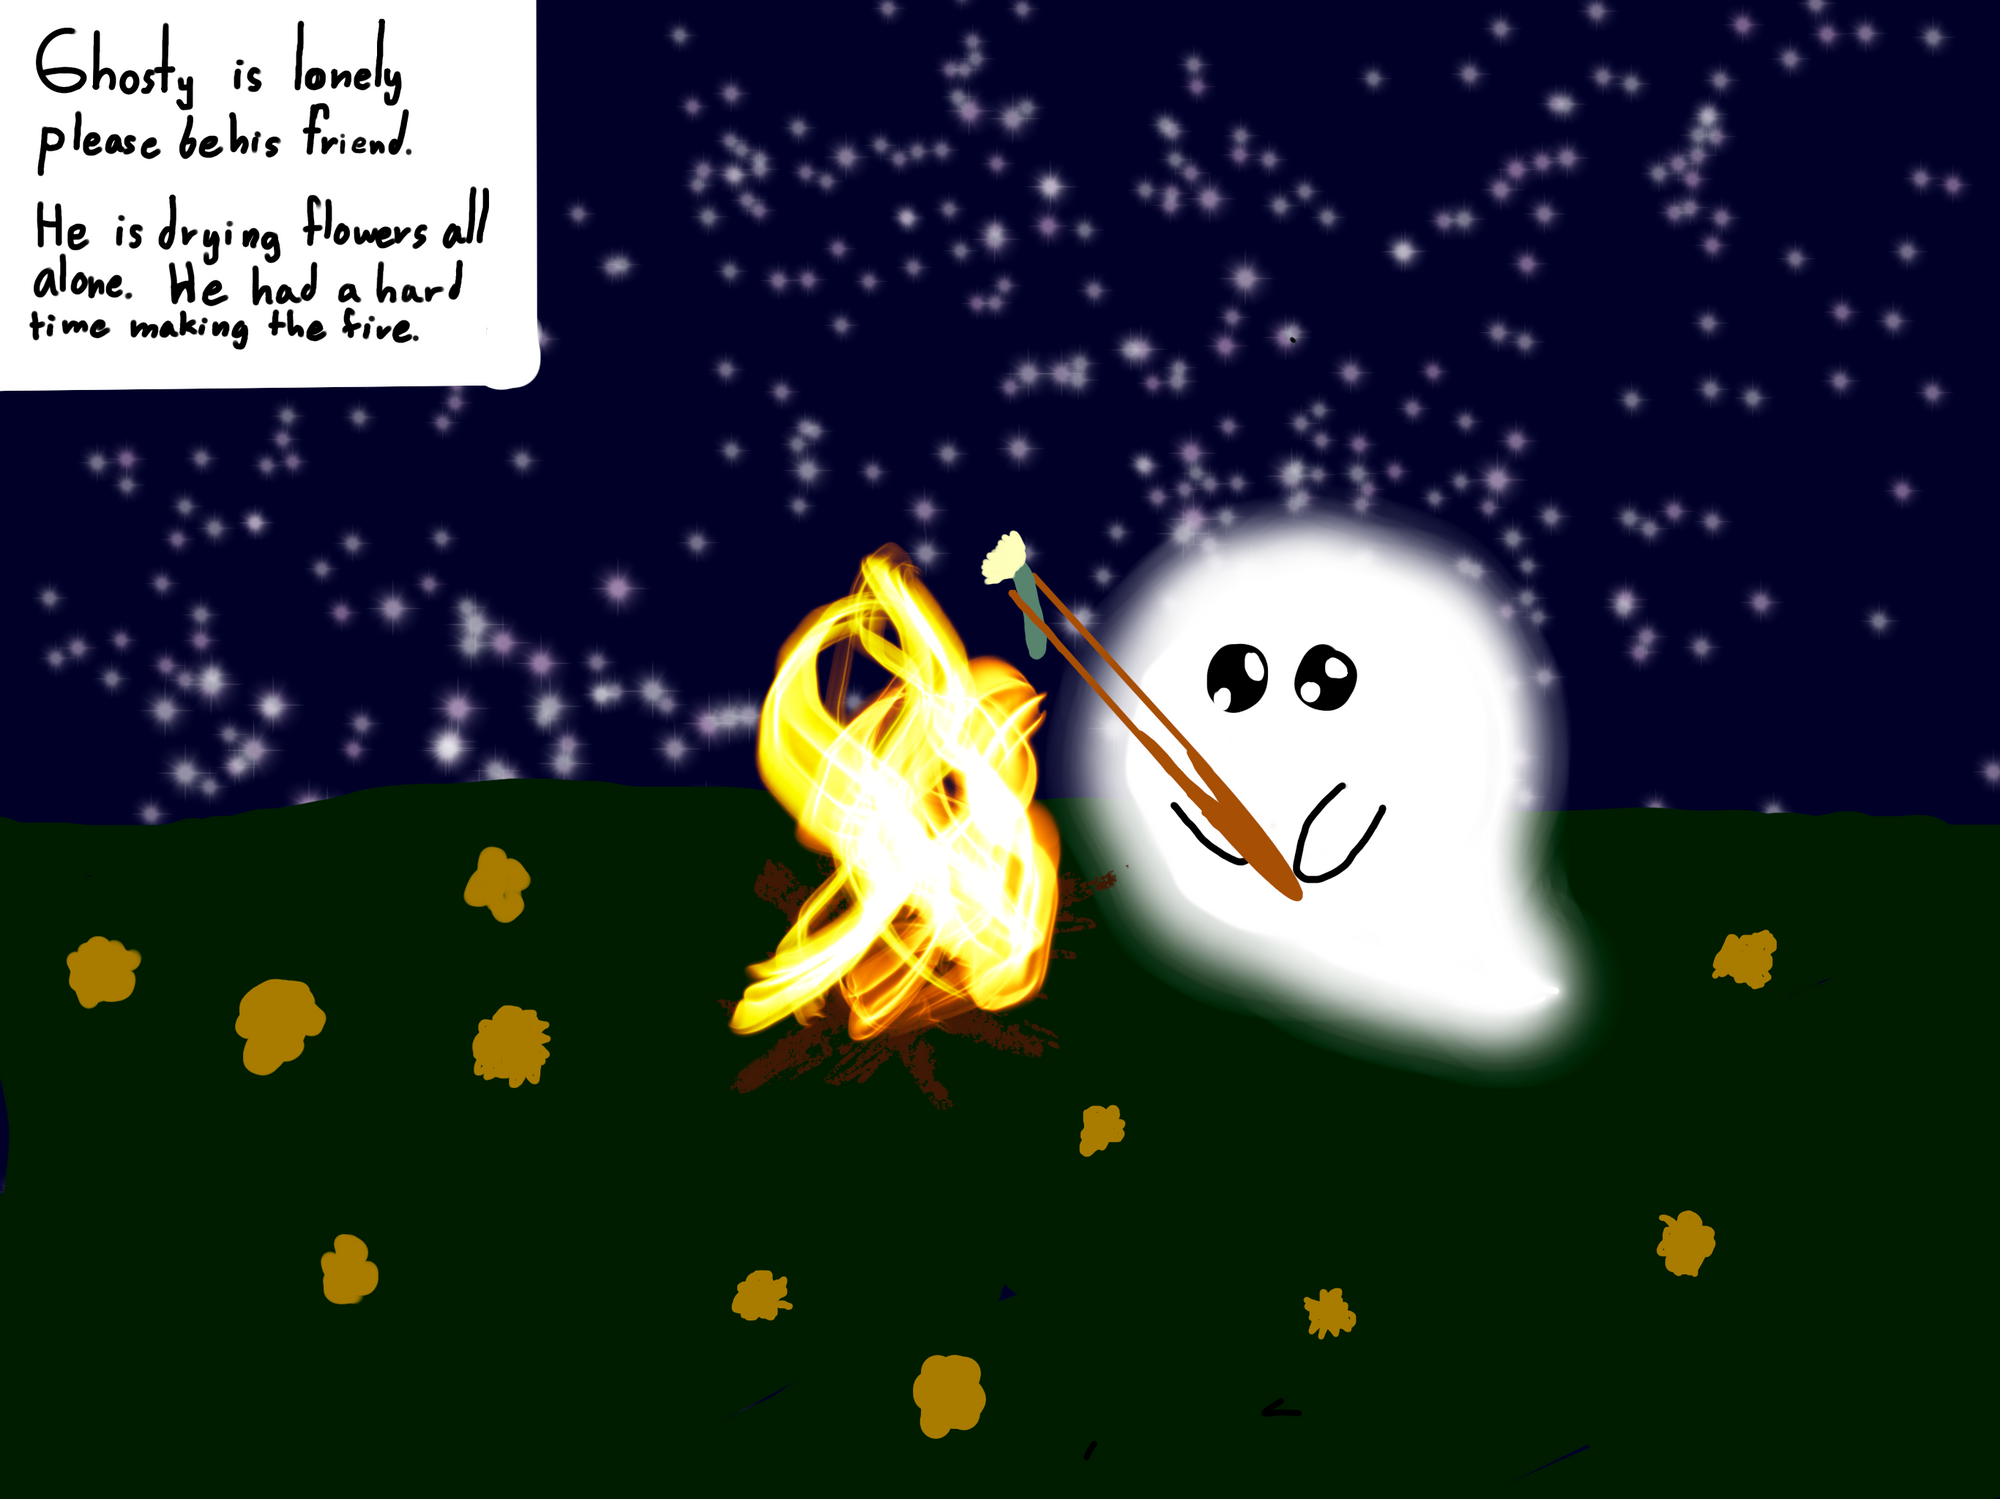 Digital painting of a ghost drying dandelions over a campfire on  a starry night. Text in the upper lefthand corner reads: Ghosty is lonely. Please be his friend. He is drying flowers all alone. He had a hard time starting the fire.